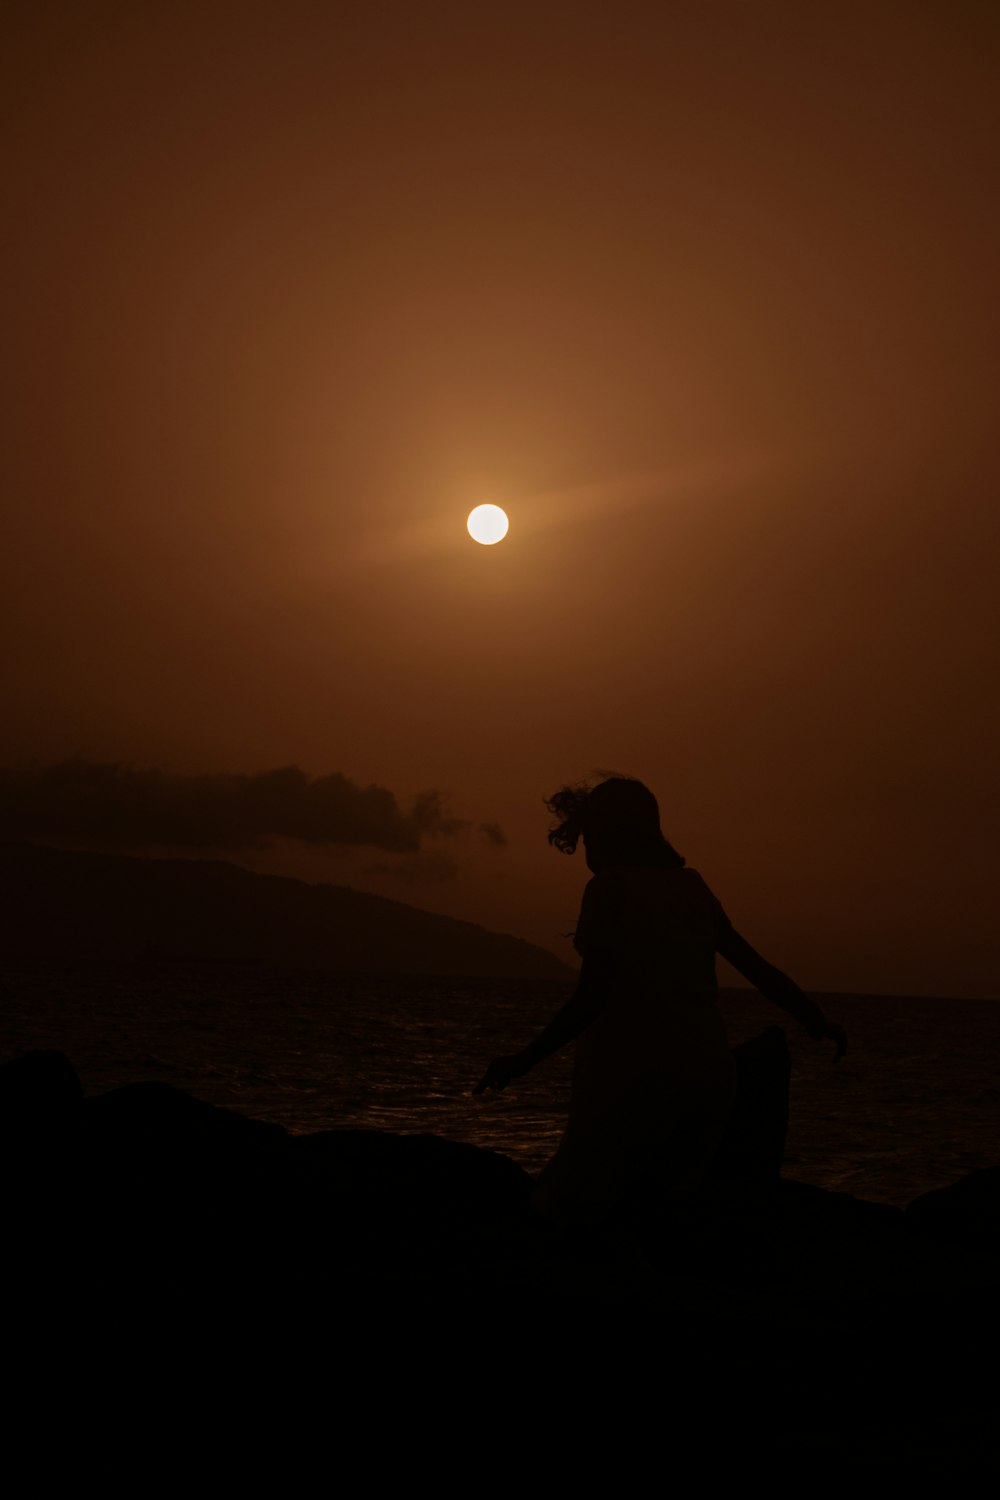 a person sitting on a rock watching the sun set